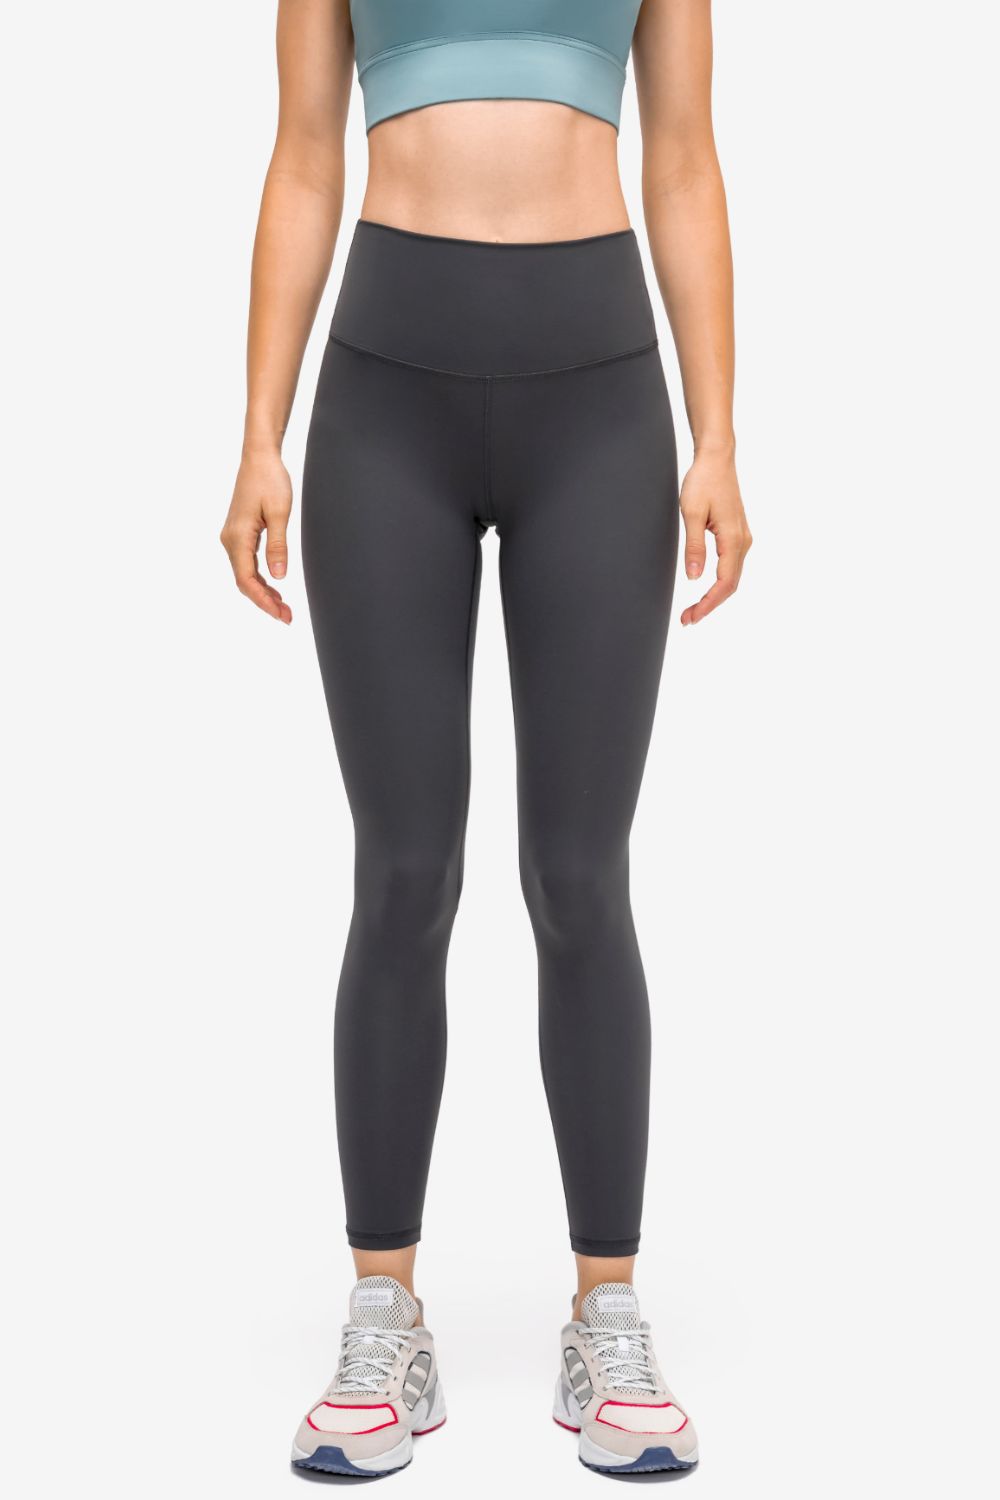 Dark Slate Gray Welcome To The Best Days Of My Life Invisible Pocket Sports Leggings Activewear